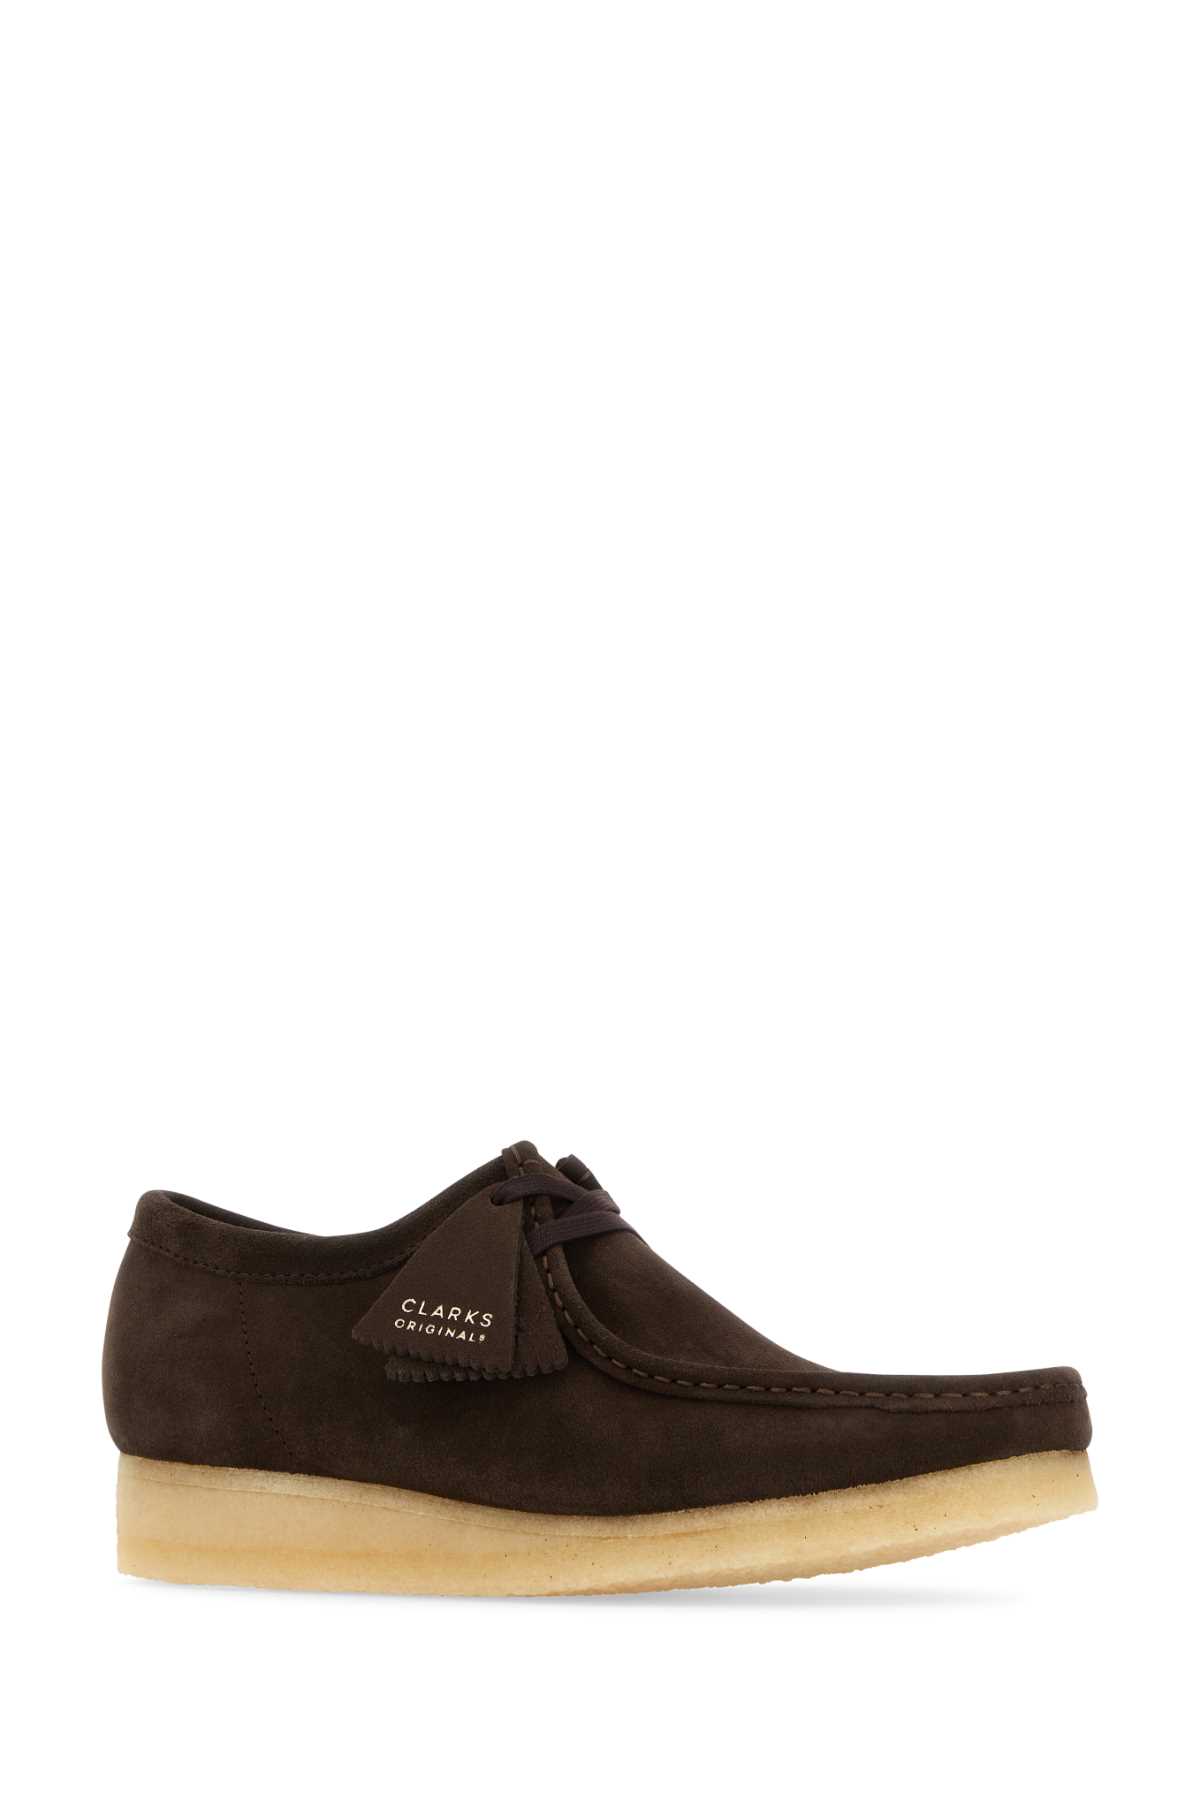 Clarks Chocolate Suede Wallabee Ankle Boots In Darkbrownsuede